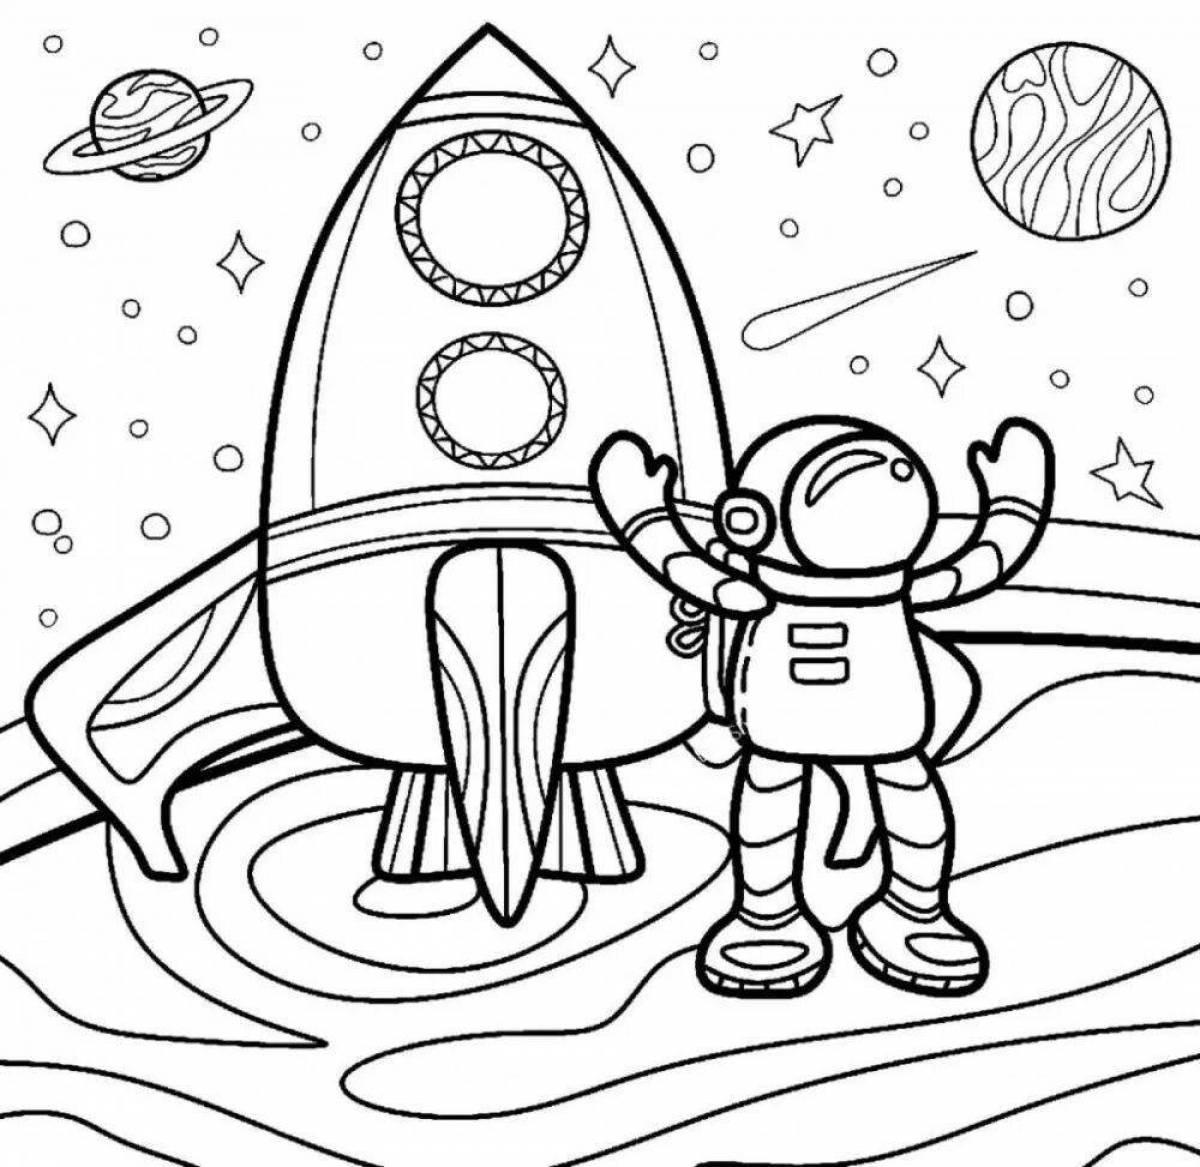 Coloring book bright astronaut in a spacesuit